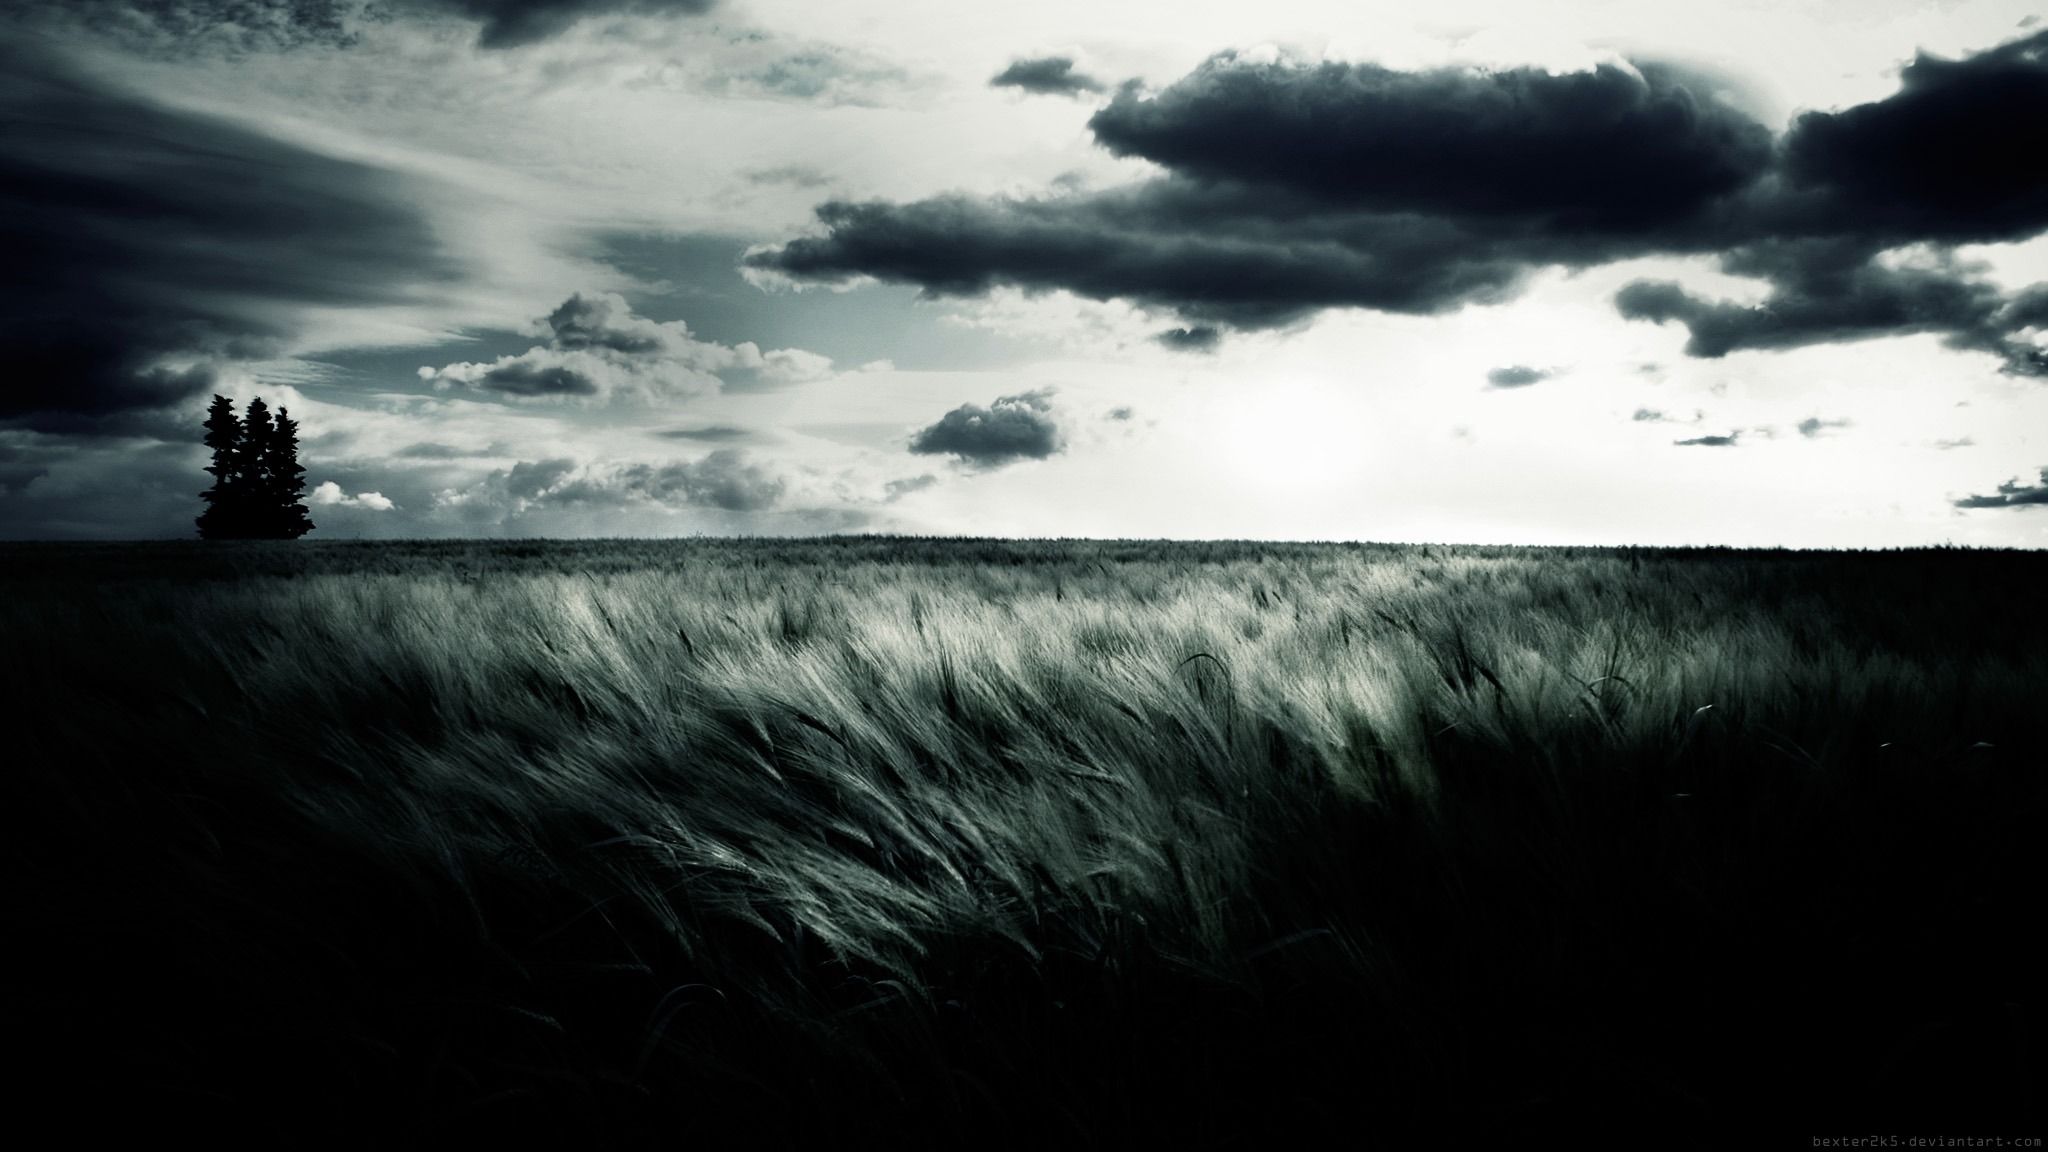 hd wallpaper abstract black and white nature fields wallpapers Car